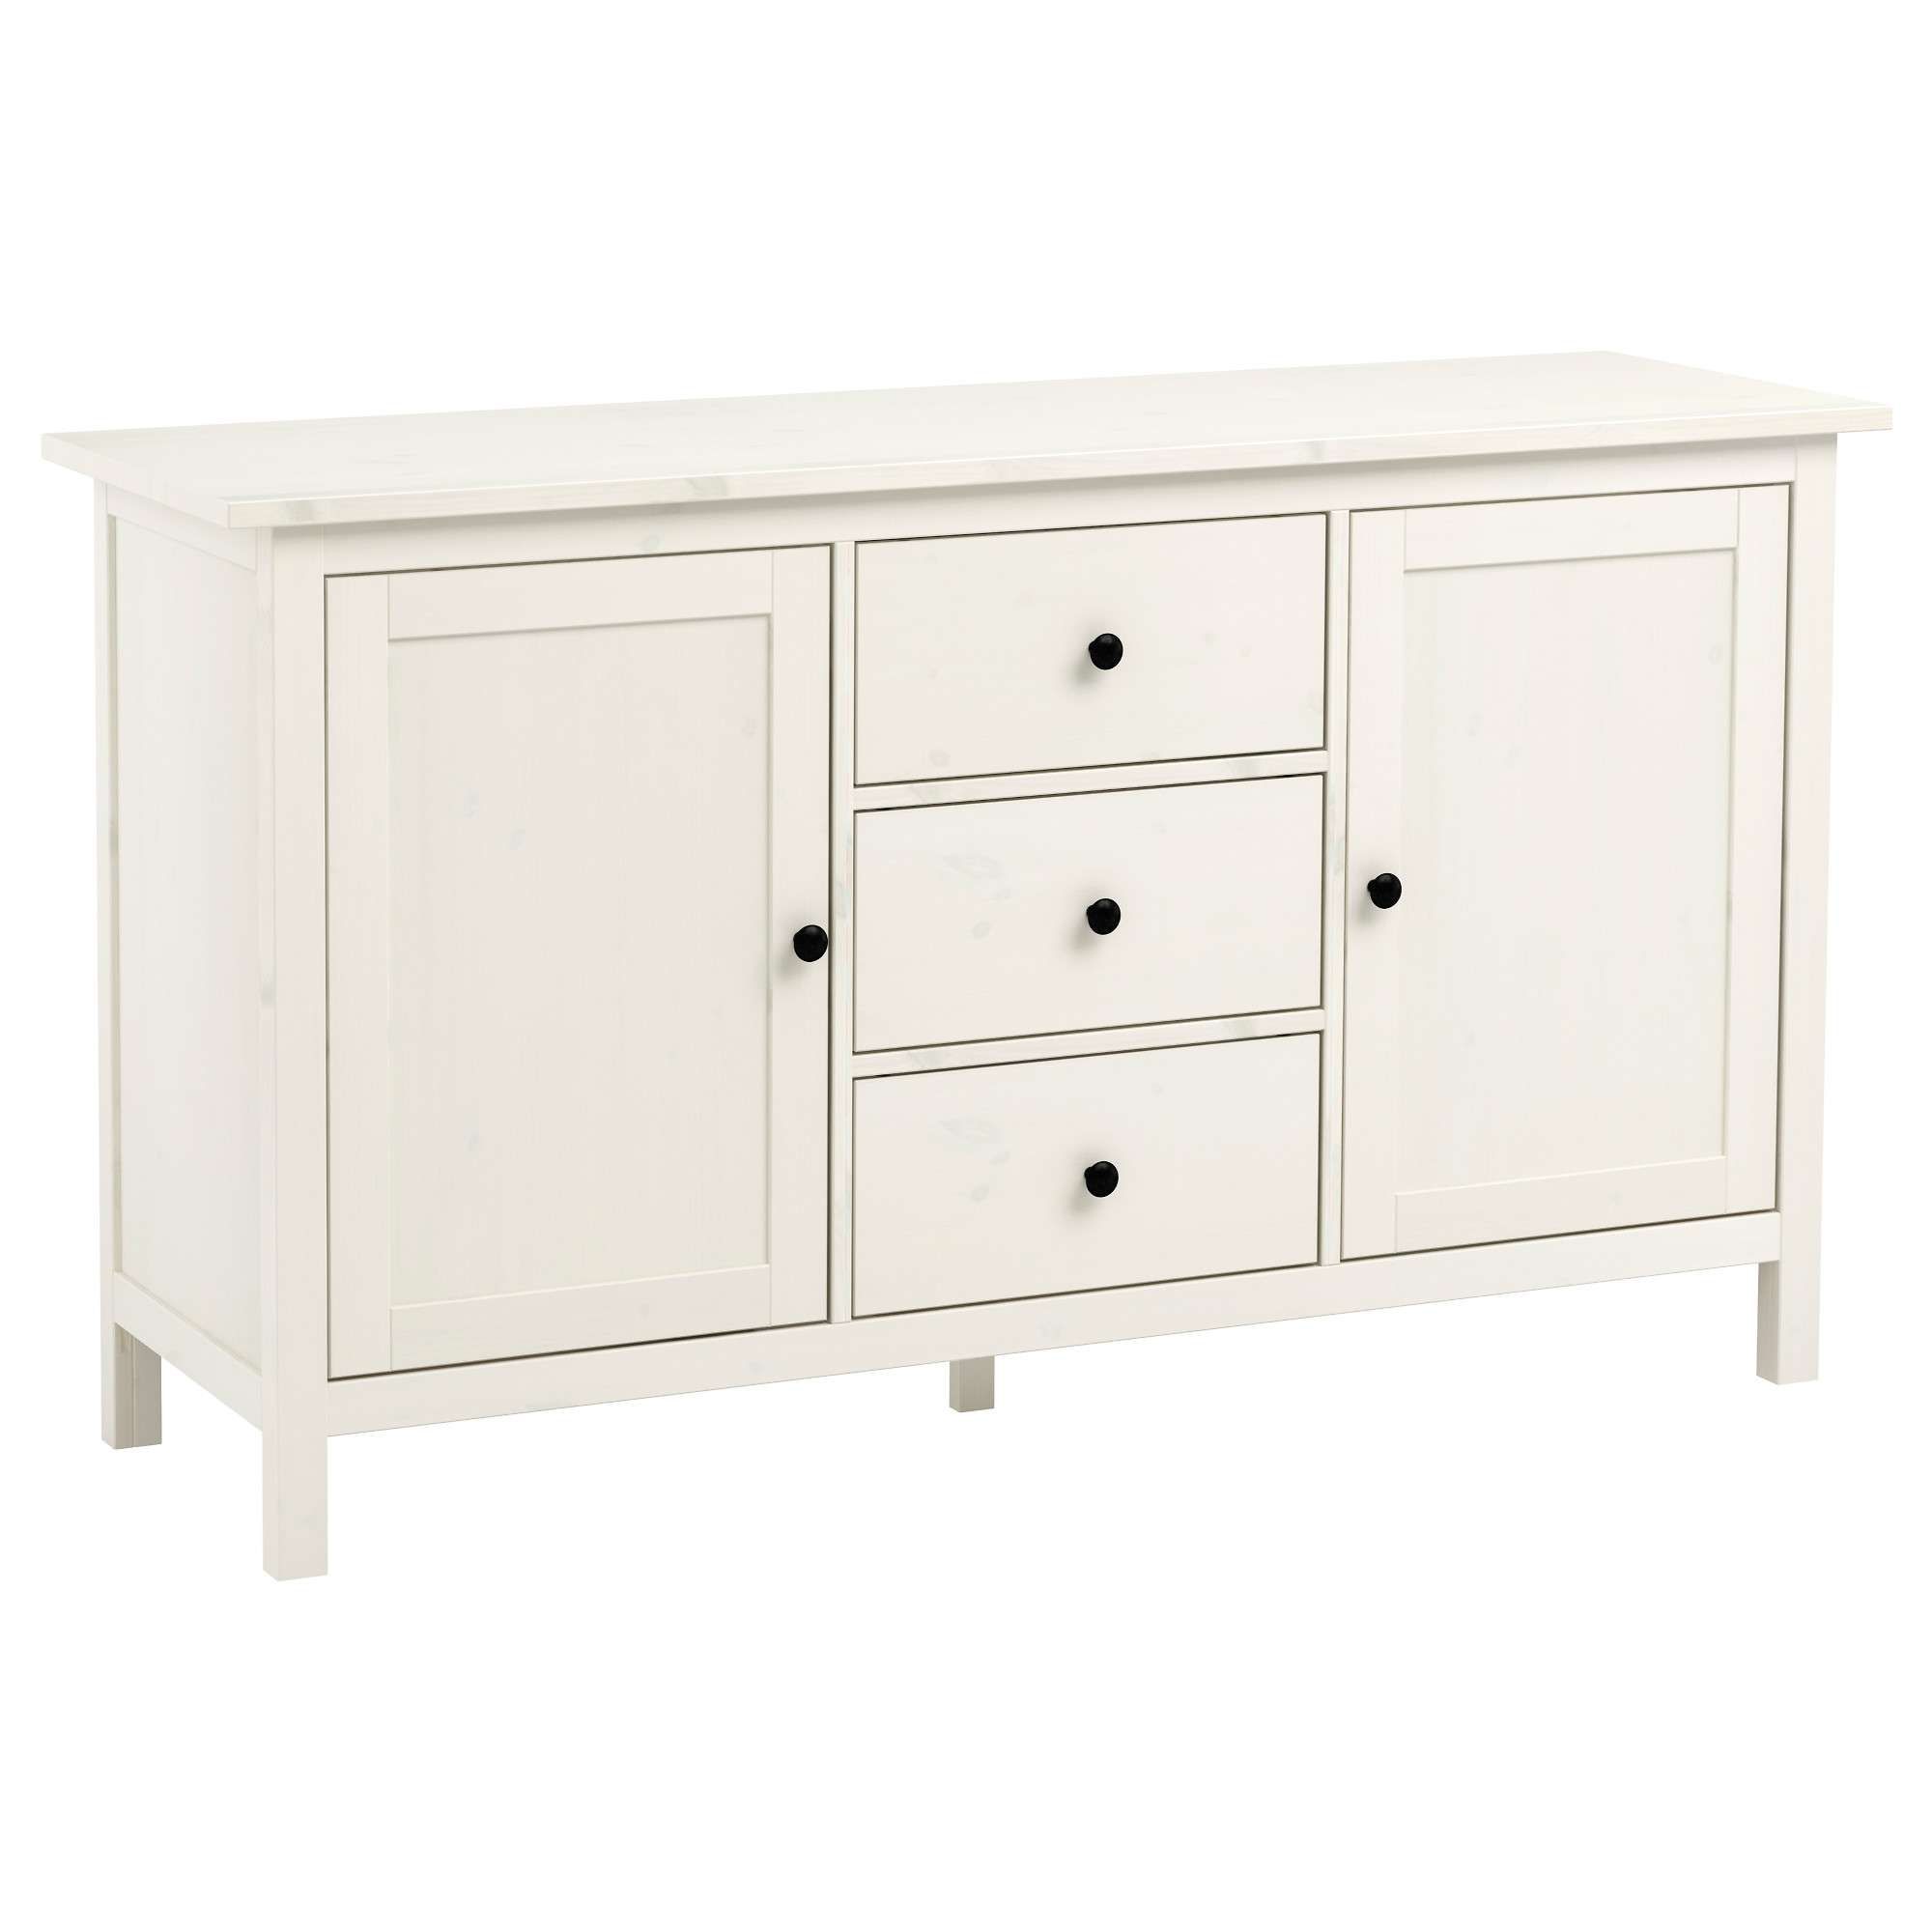 Hemnes Sideboard White Stain 157x88 Cm – Ikea In White Gloss Ikea Sideboards (View 3 of 20)